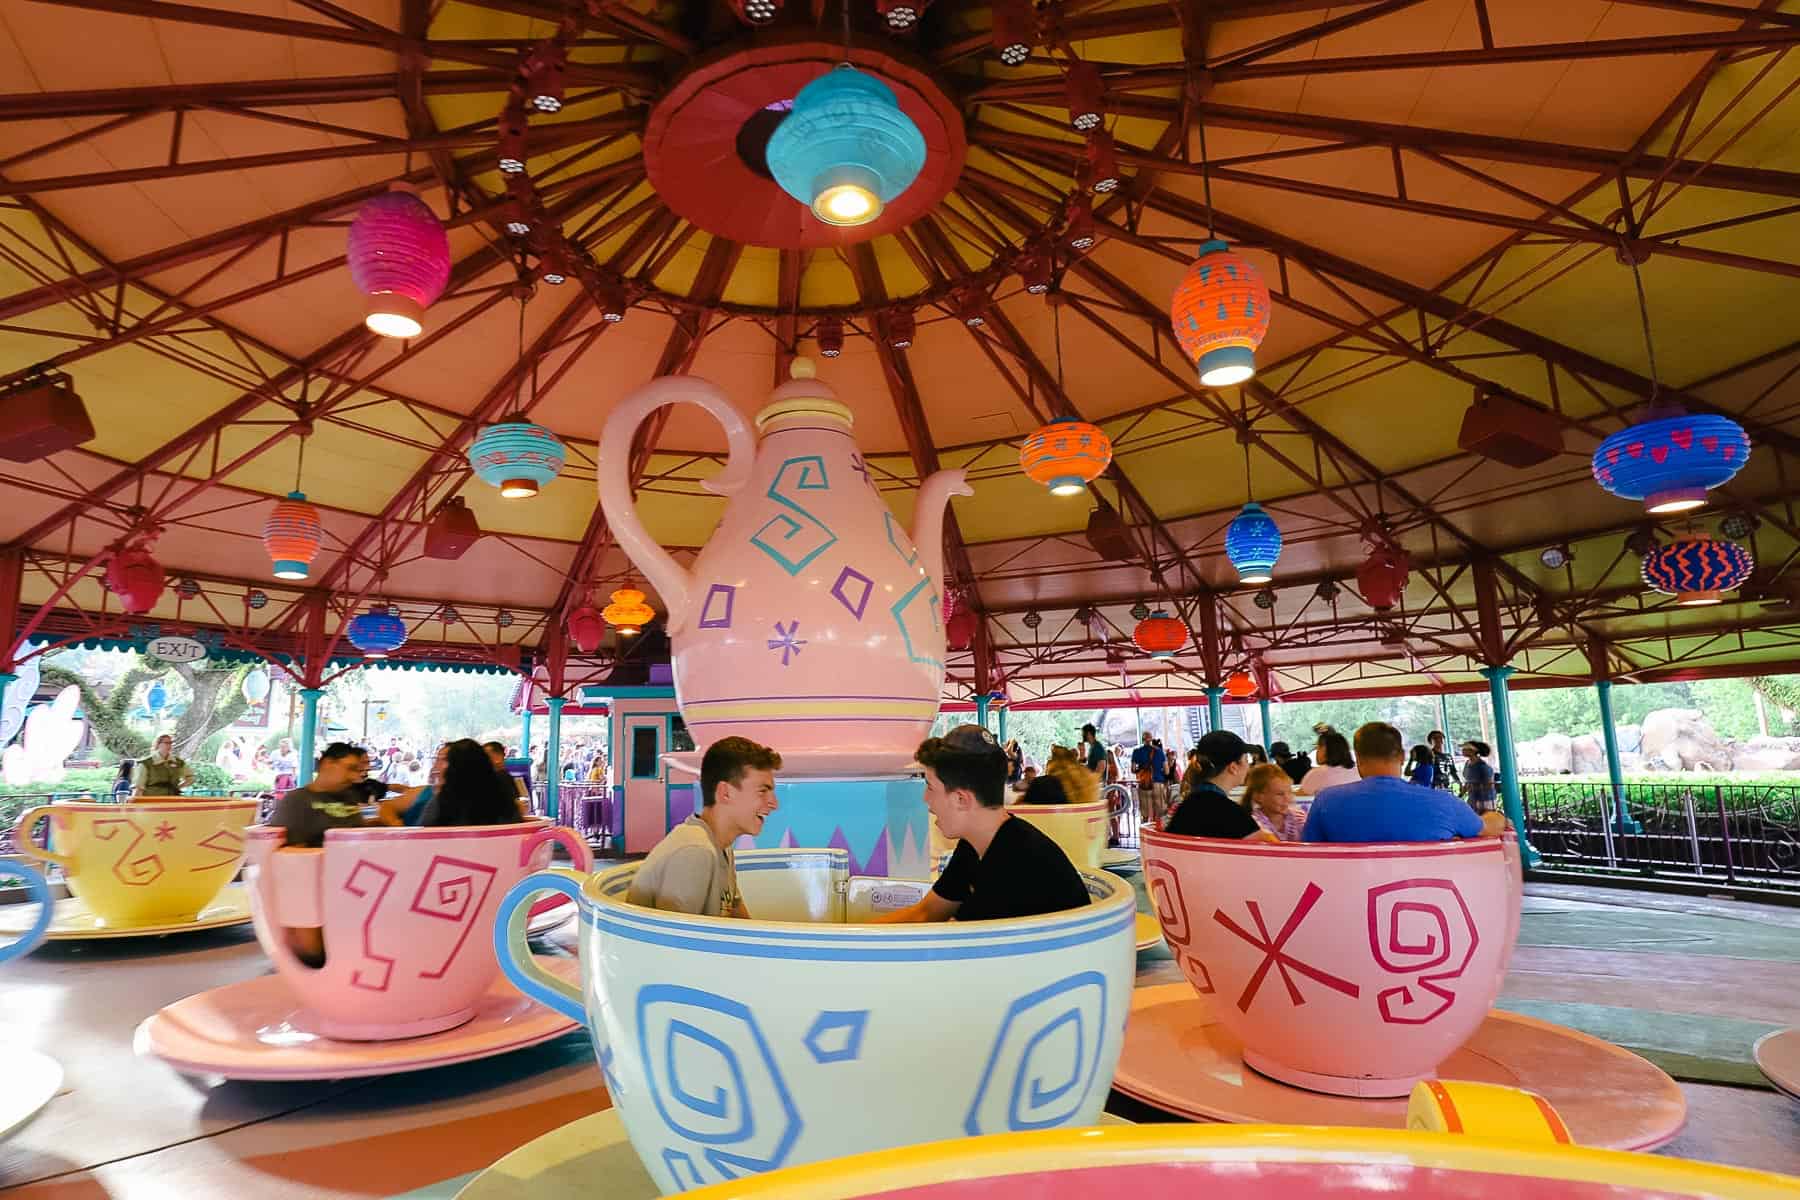 Guests spinning on the Mad Tea Party ride at Magic Kingdom. 